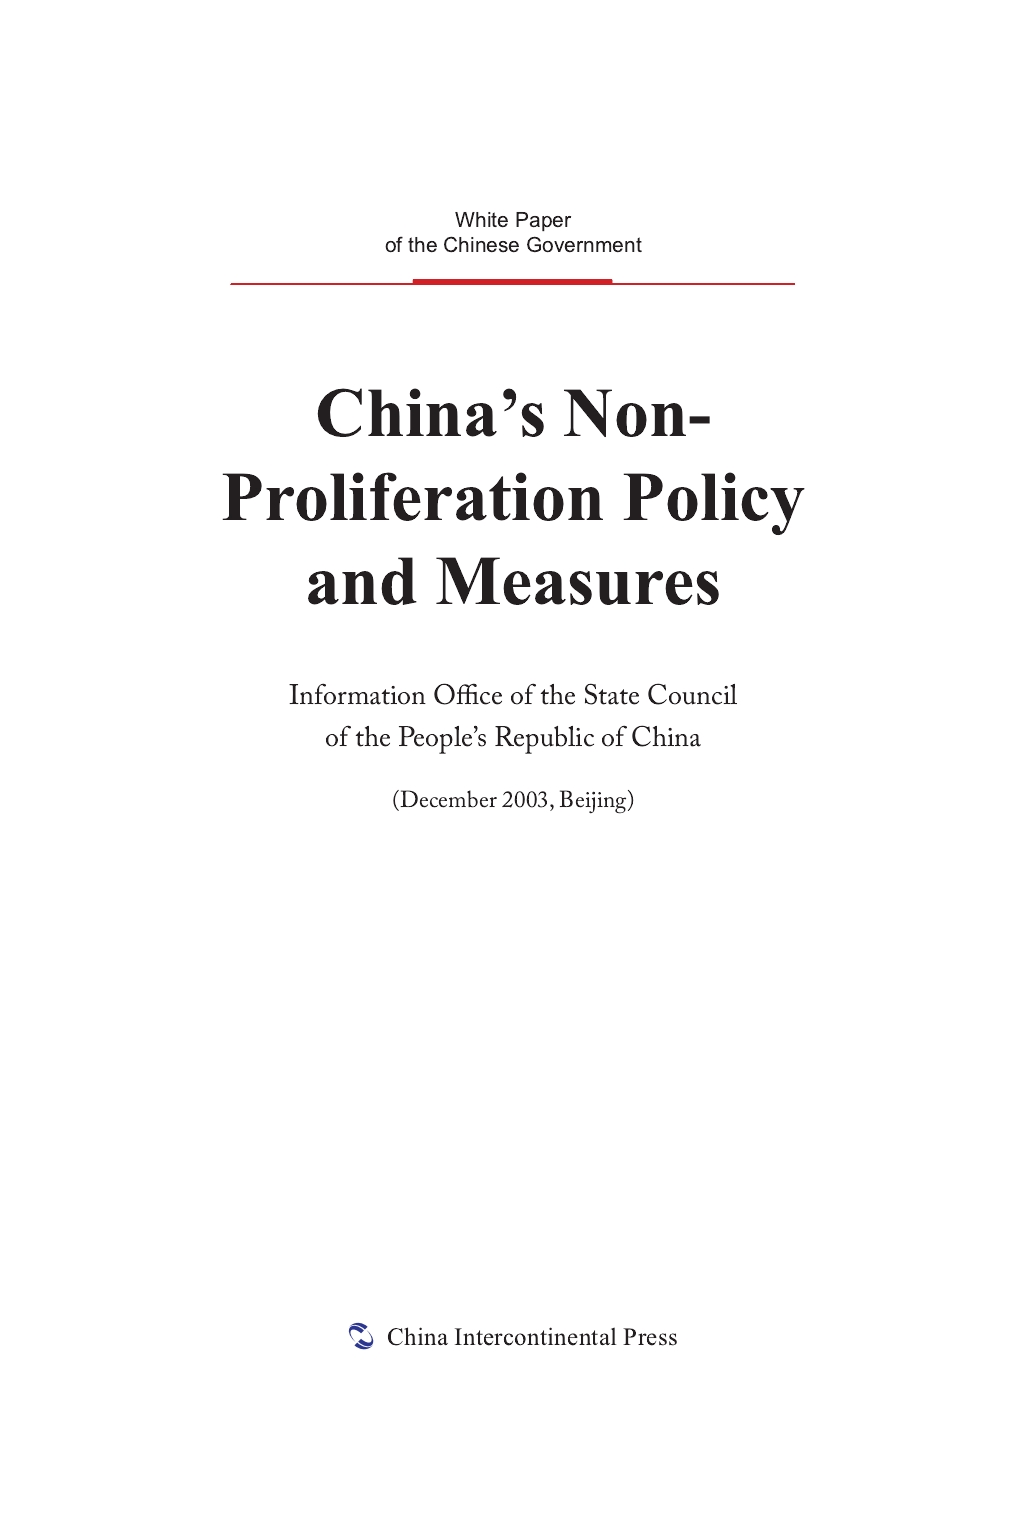 China's Non-Proliferation Policy and Measures